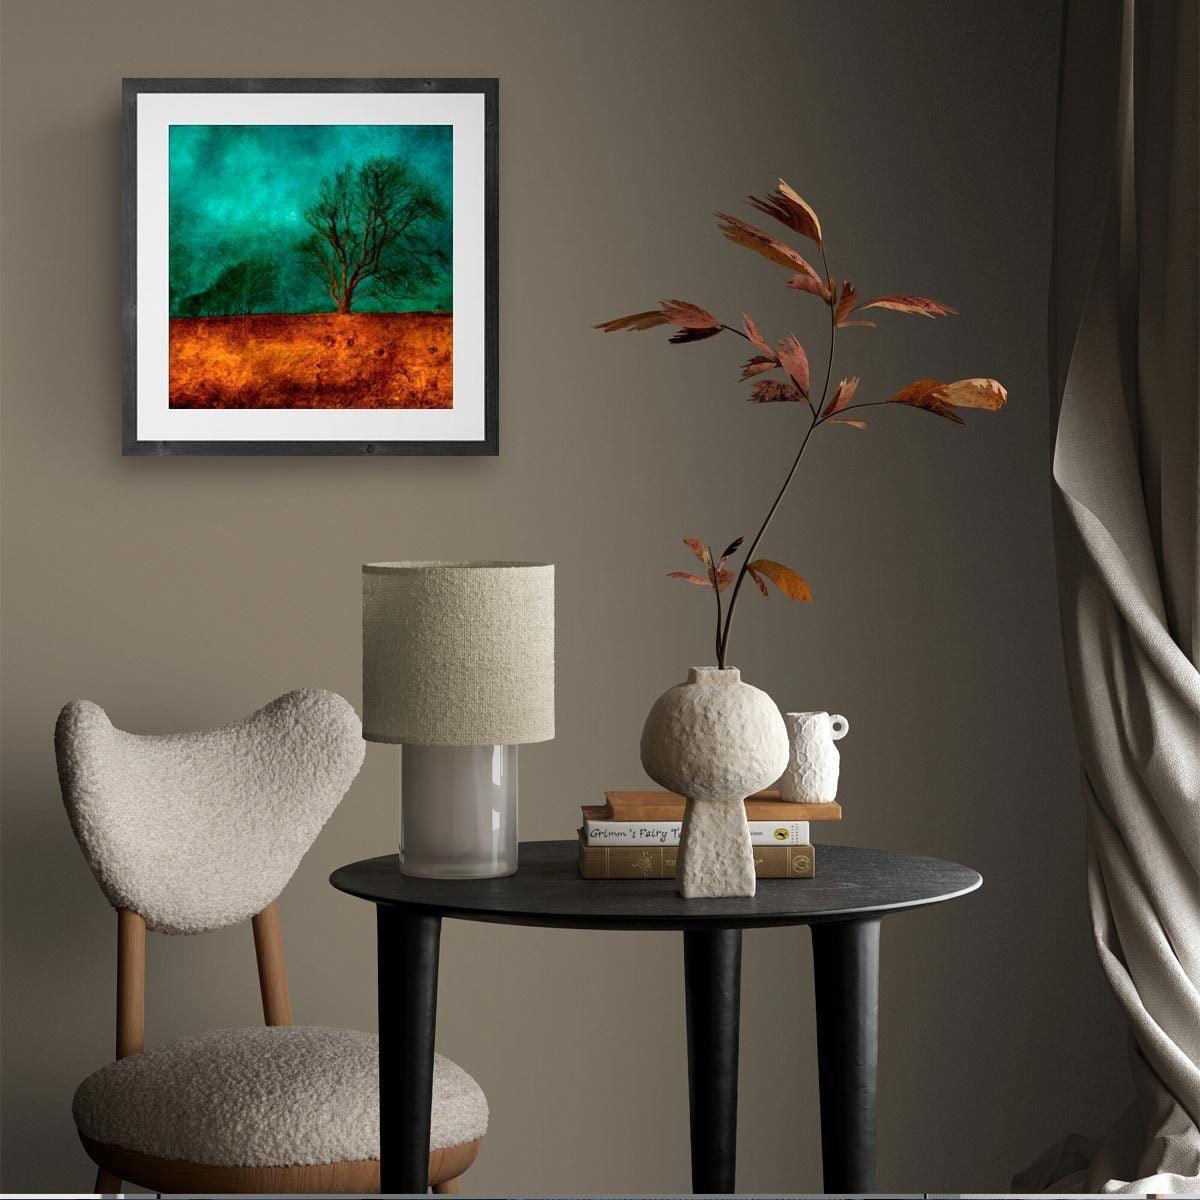 Teal Sky - N50.8904 W0.0277 - Limited Edition - Gigglewick Gallery